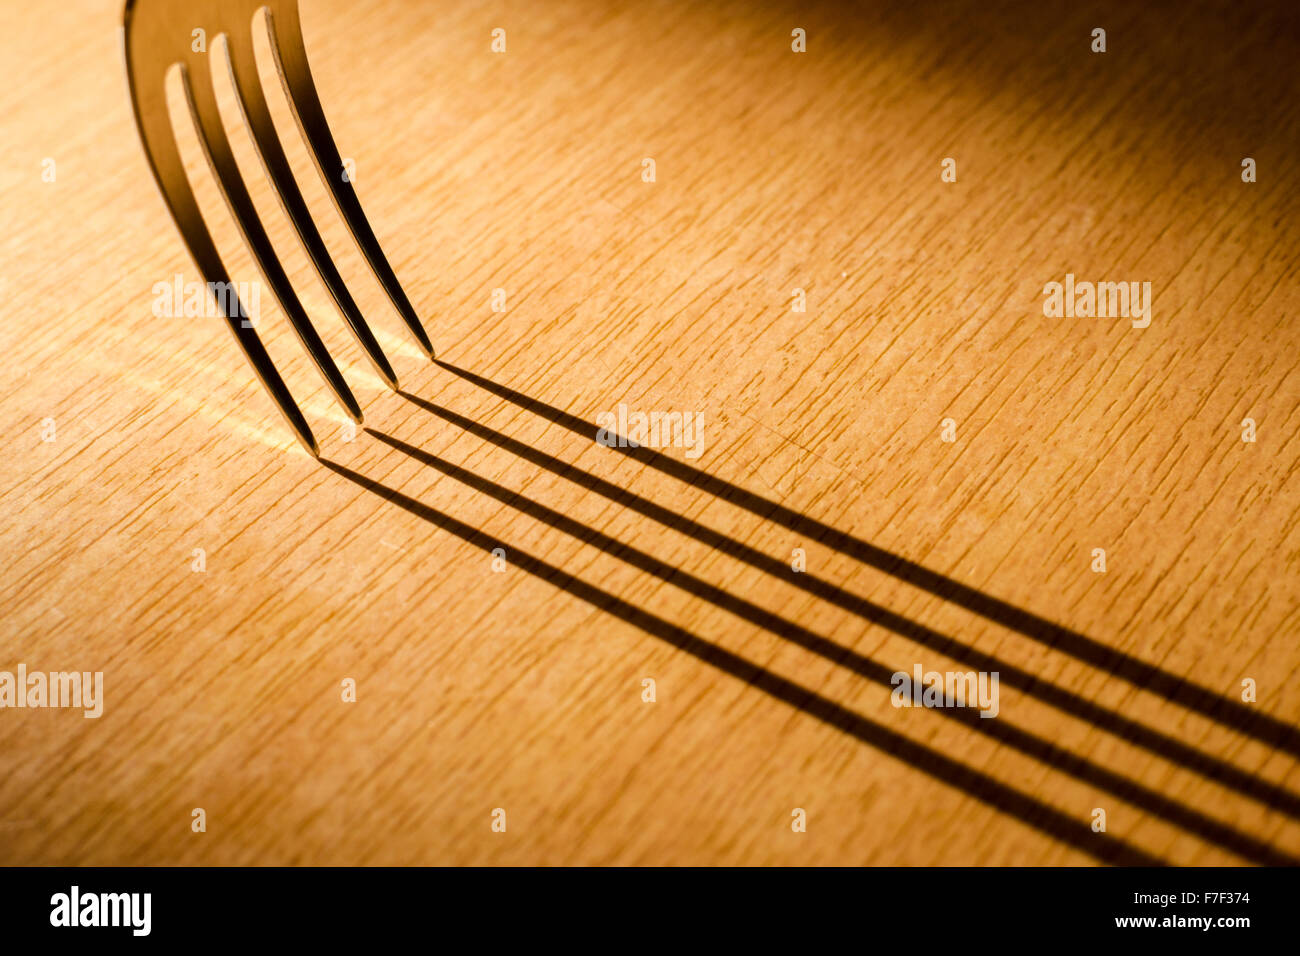 Single kitchen fork creates long shadows on a wooden work surface Stock Photo